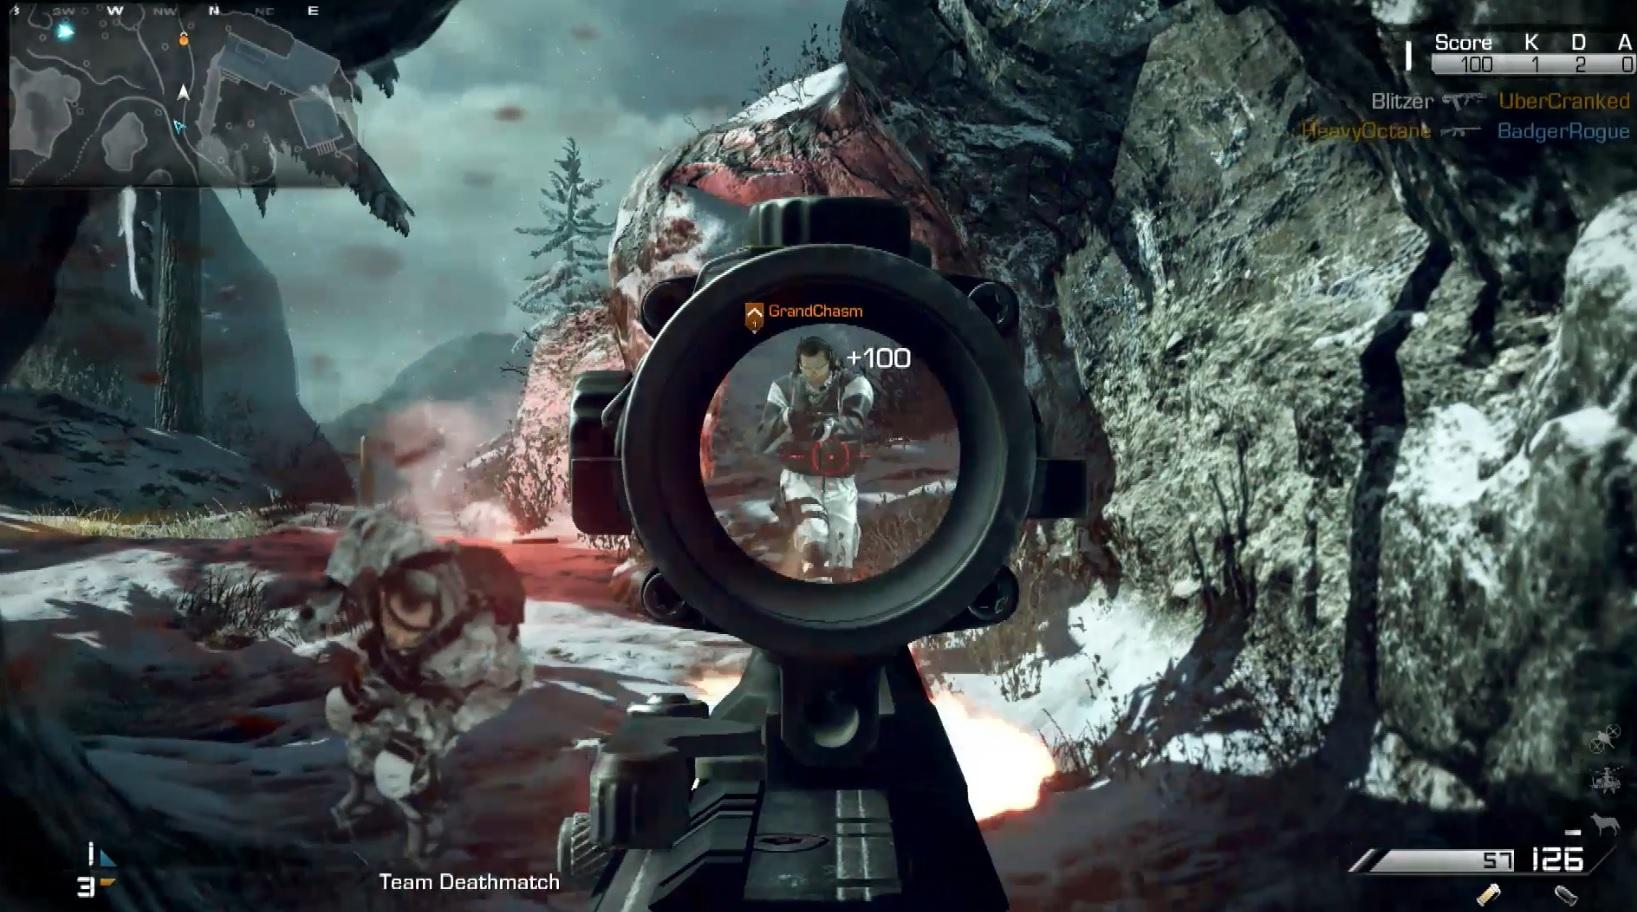 Call of Duty: Ghosts Multiplayer Designer Walks You Through Operations Tips  - MP1st